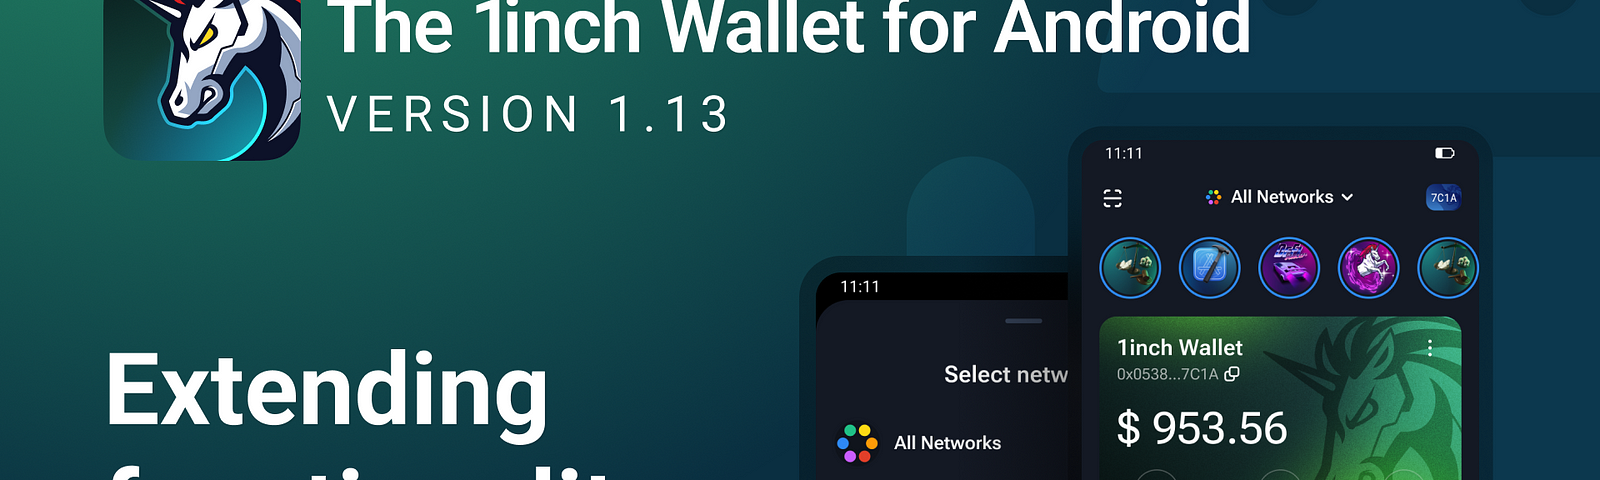 The 1inch Wallet for Android boosts its power with the latest updates